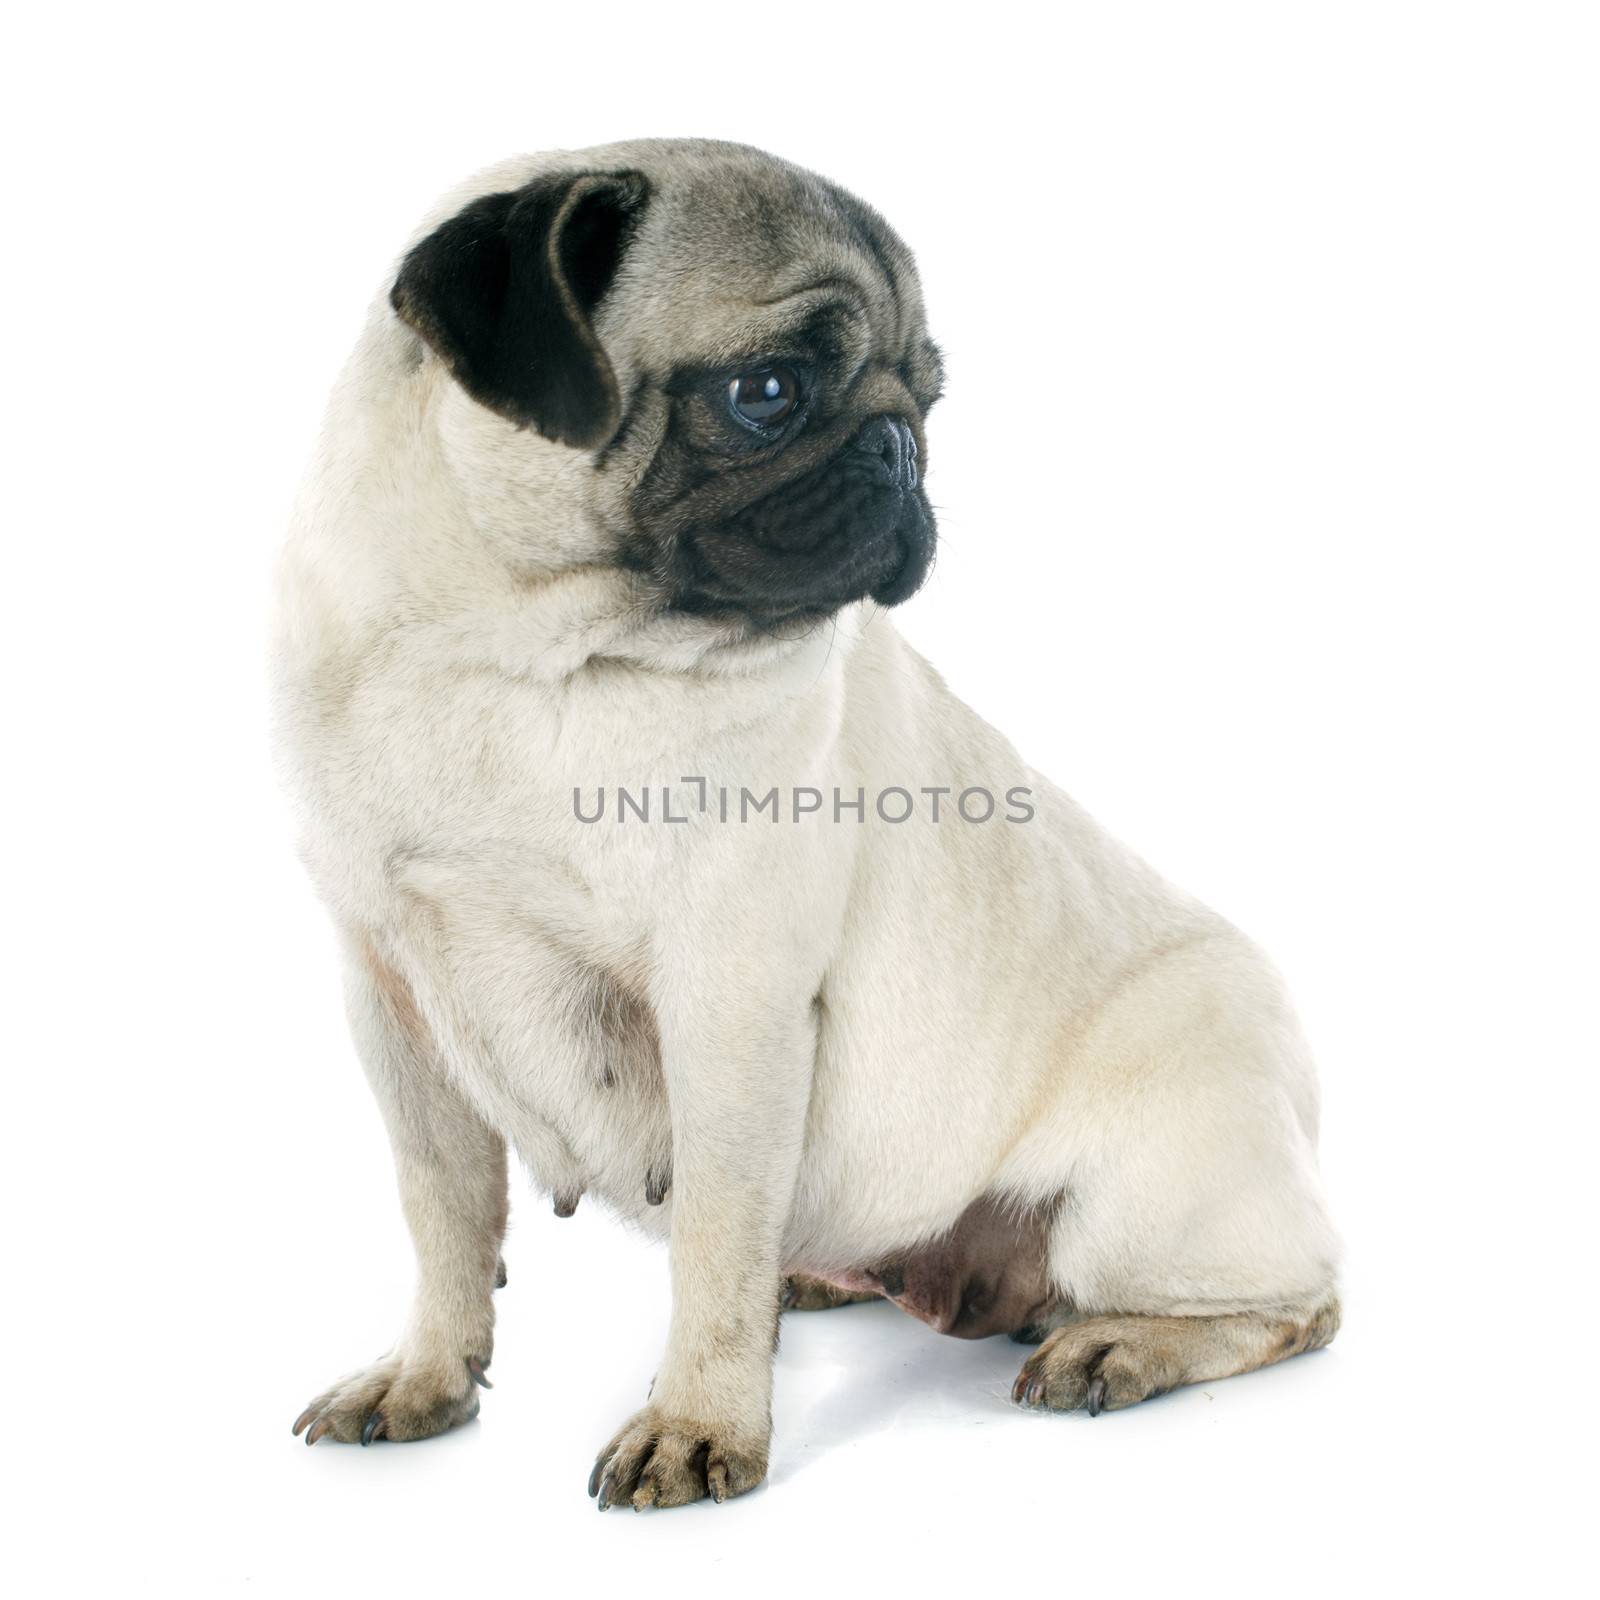 young pug in front of white background